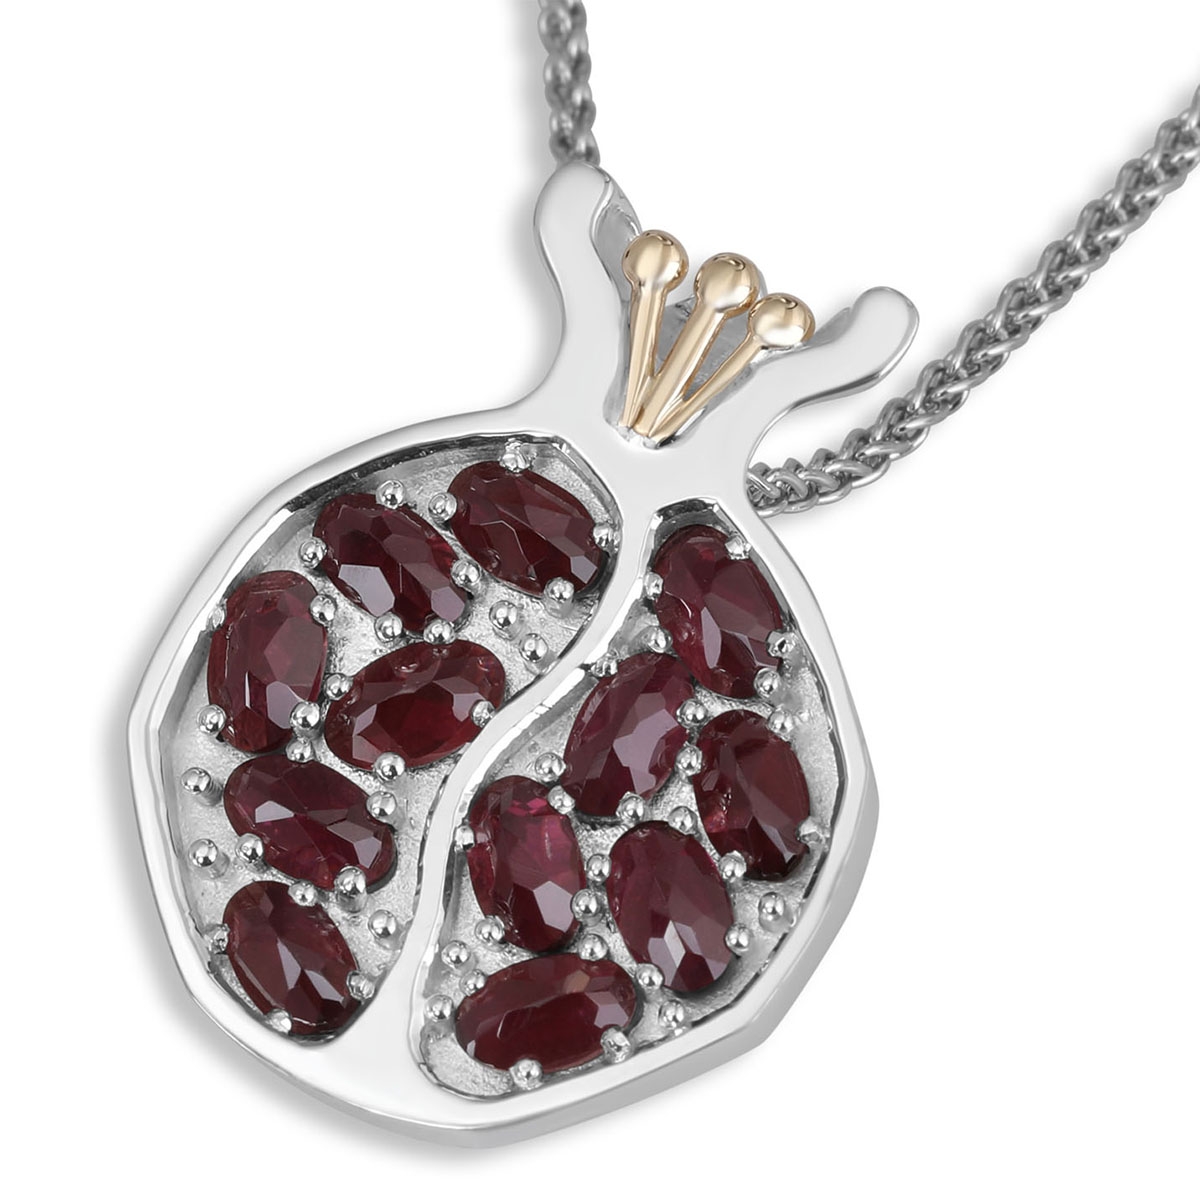 Rafael Jewelry Large Pomegranate 925 Sterling Silver and 9K Gold with Garnet Gemstones - 1